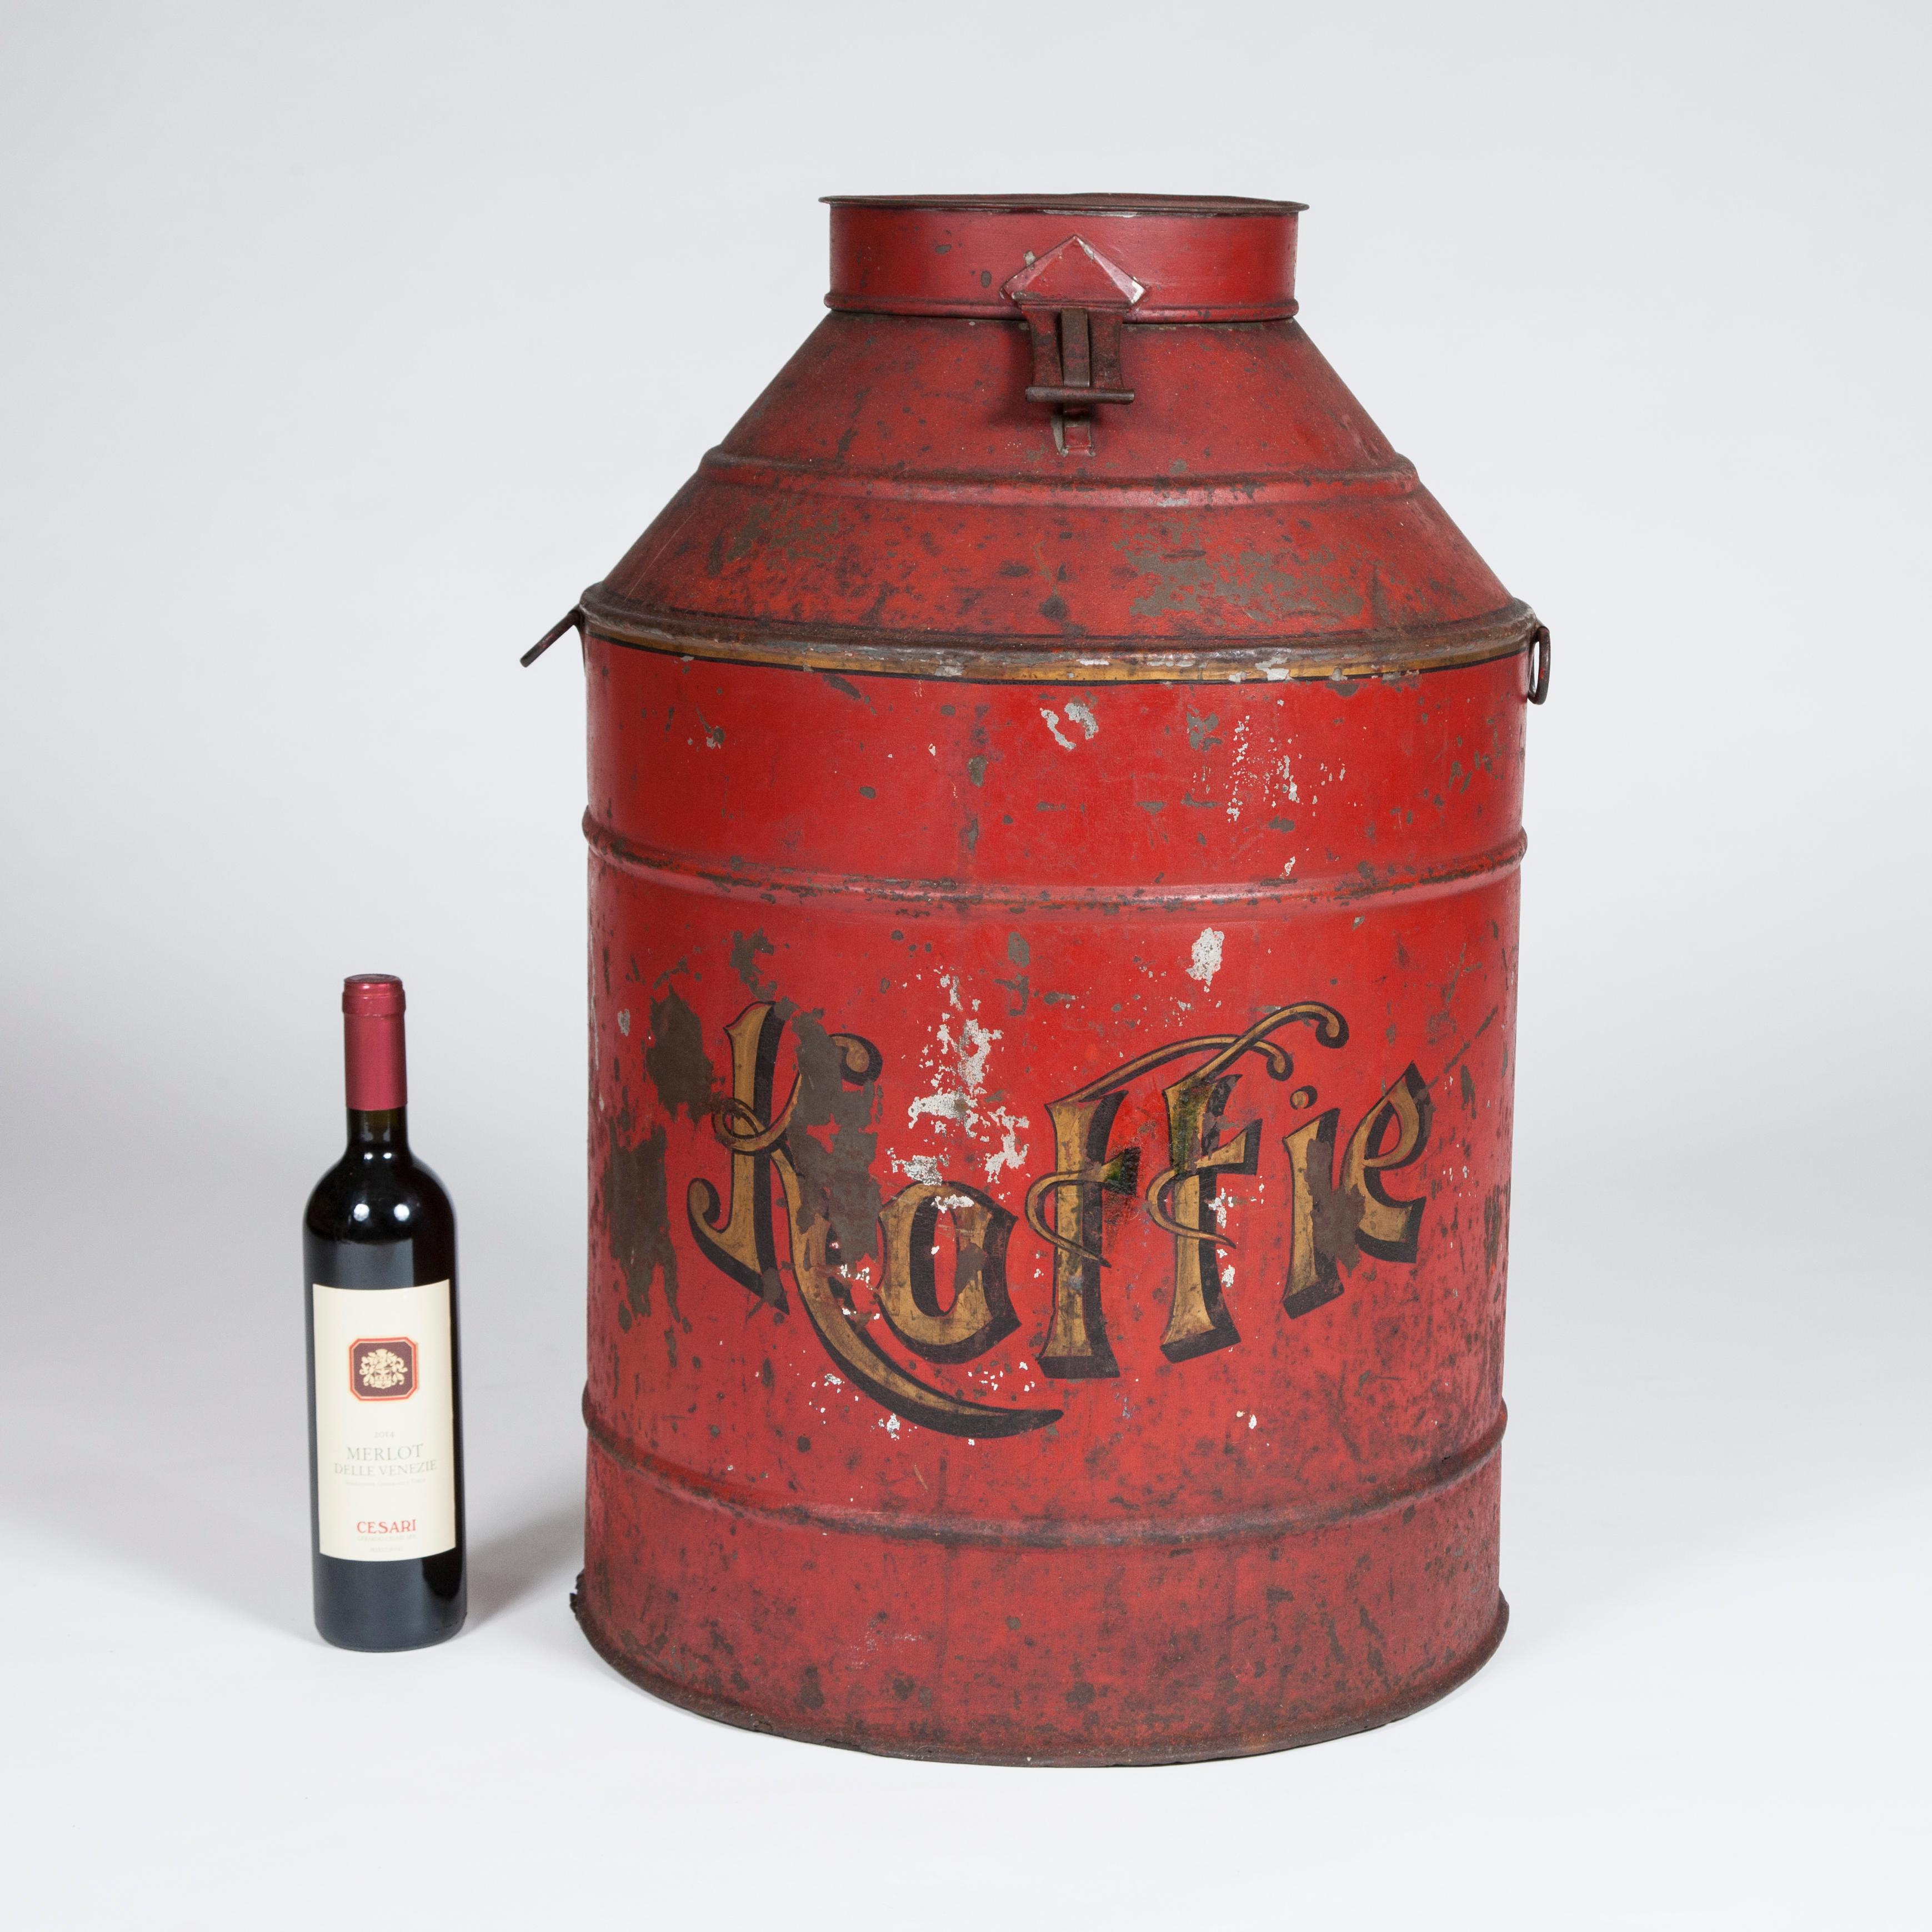 A large early 20th century Dutch painted circular tin coffee container, marked Koffie.